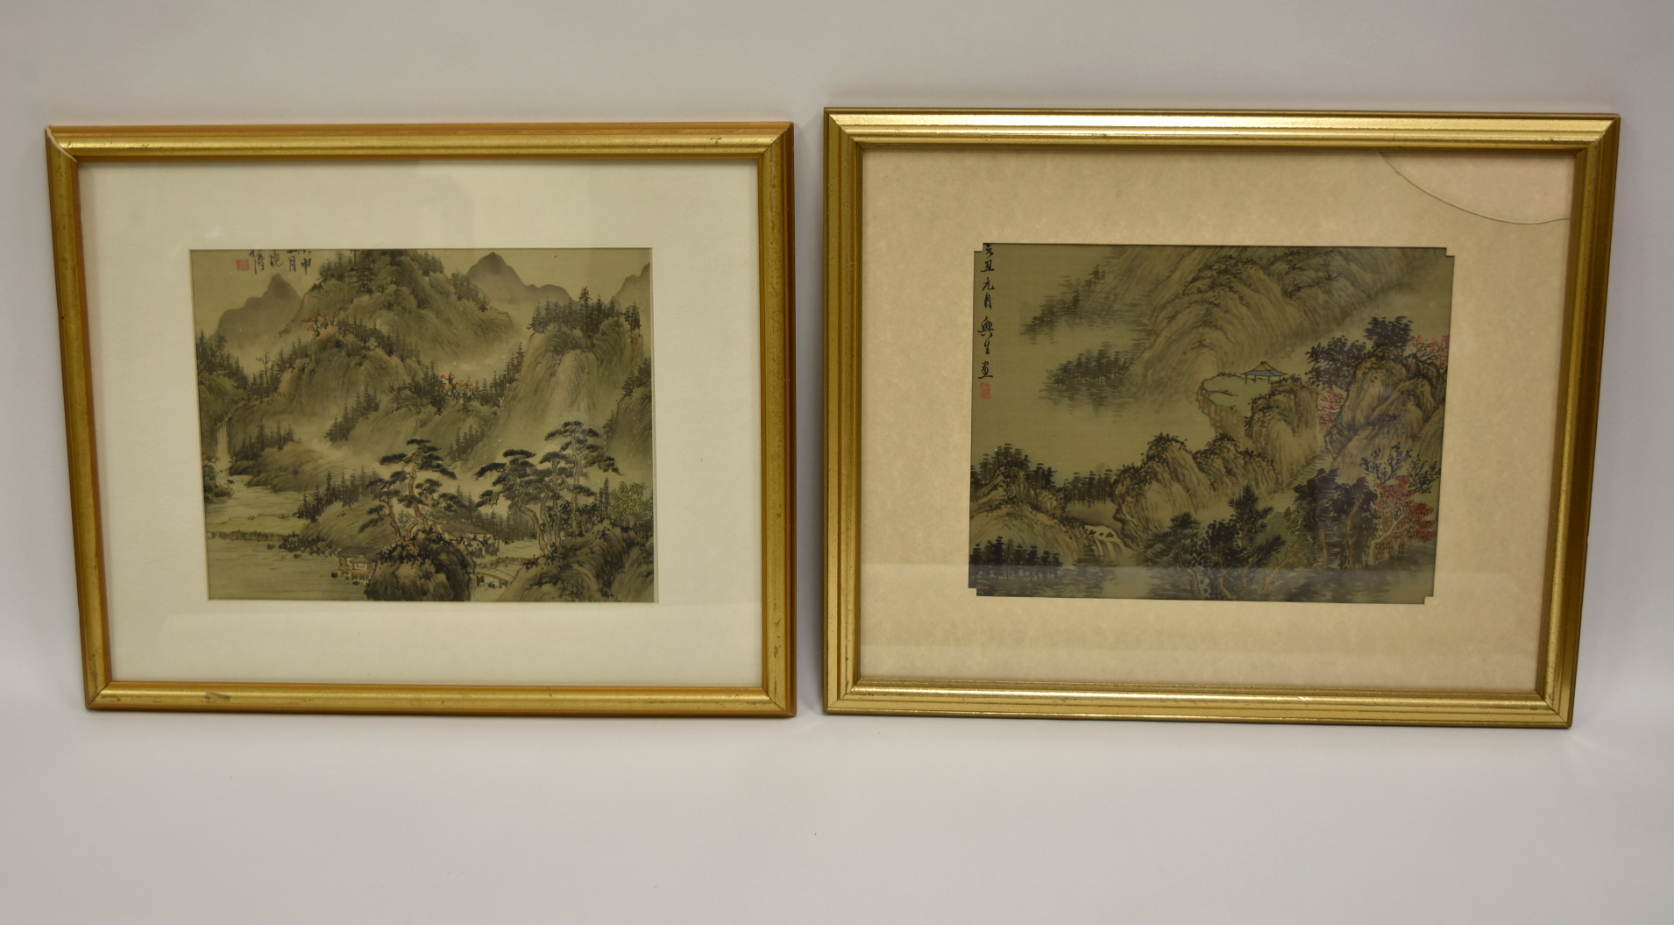 SET OF CHINESE COLOR PAINTING W MOUNTAINEOUS 2ce7a8